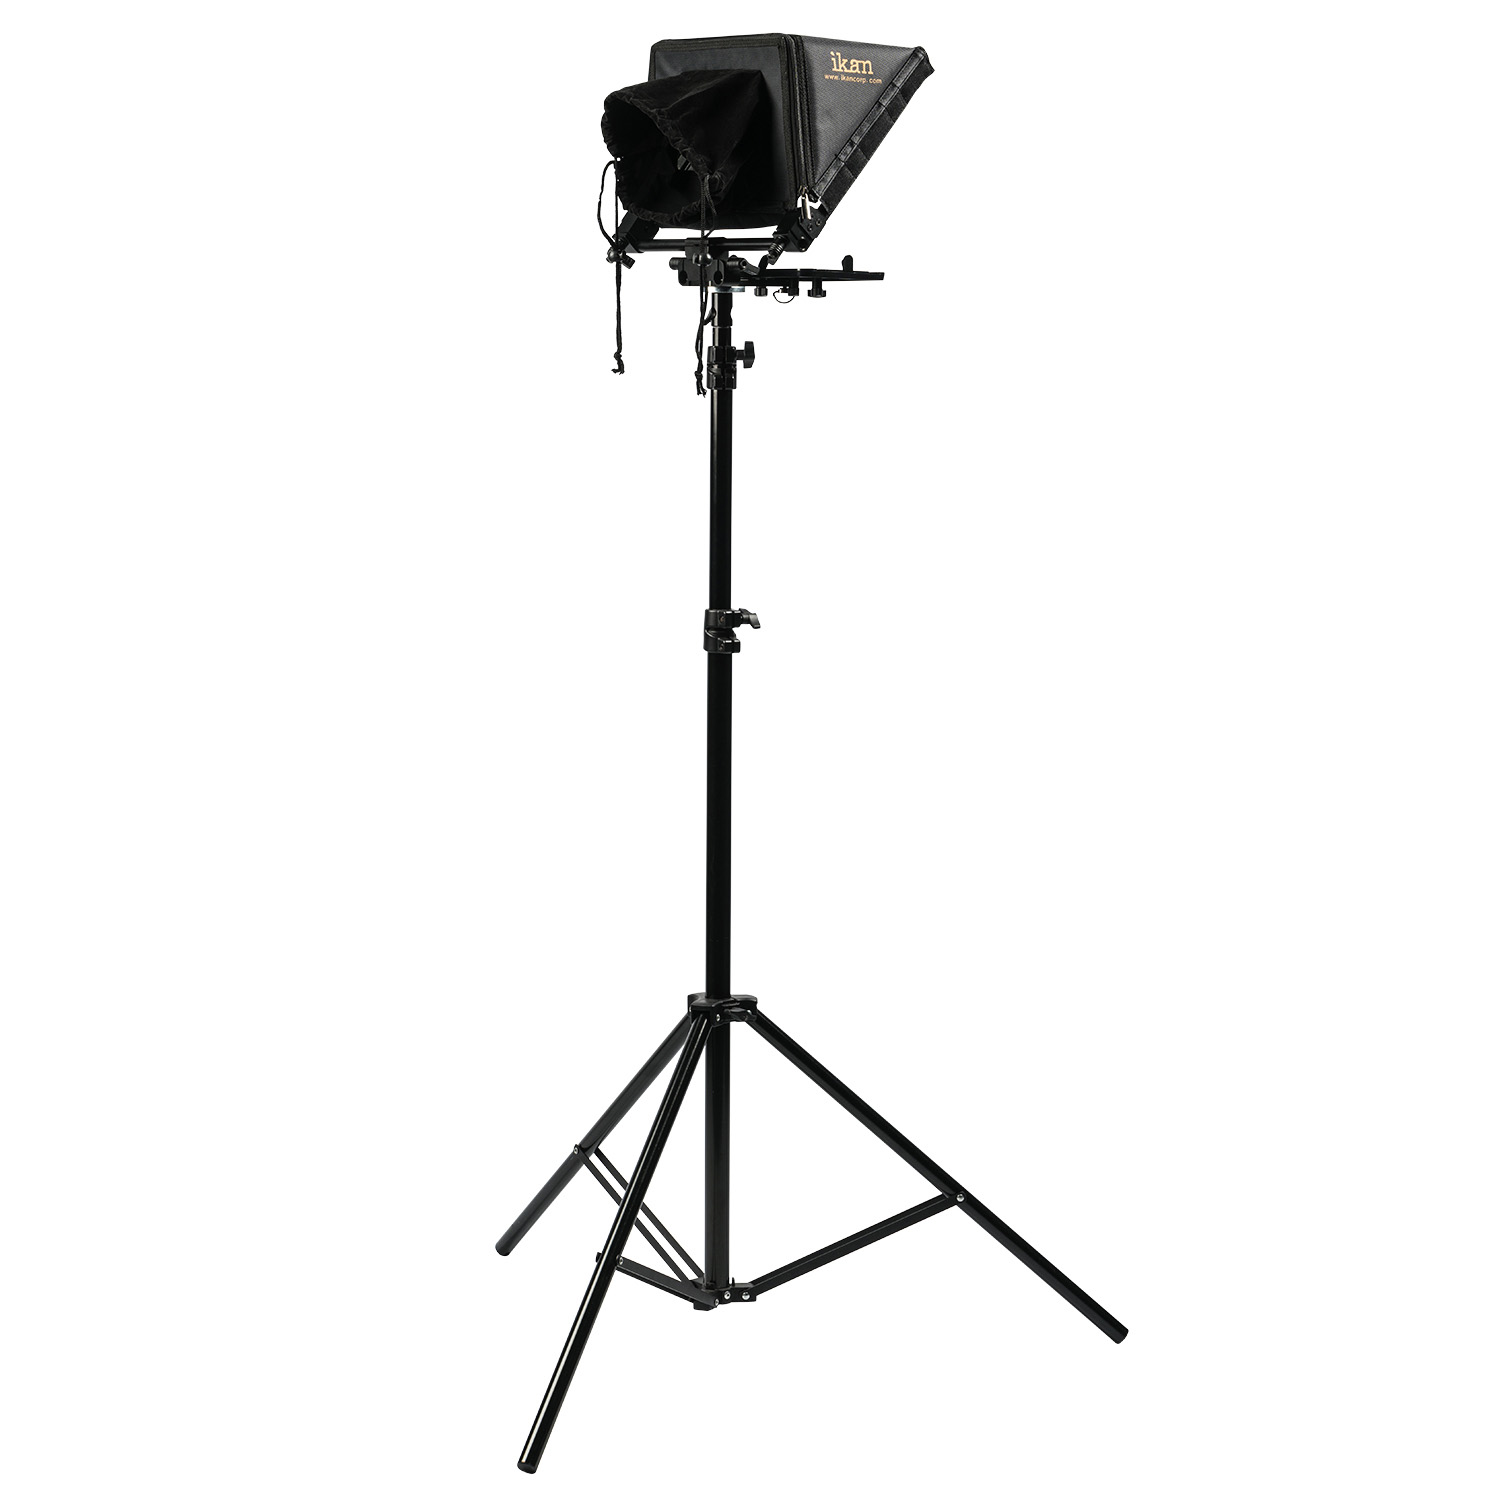 ikan Elite Tablet & iPad Light Stand Teleprompter Kit with Rolling Hard Case